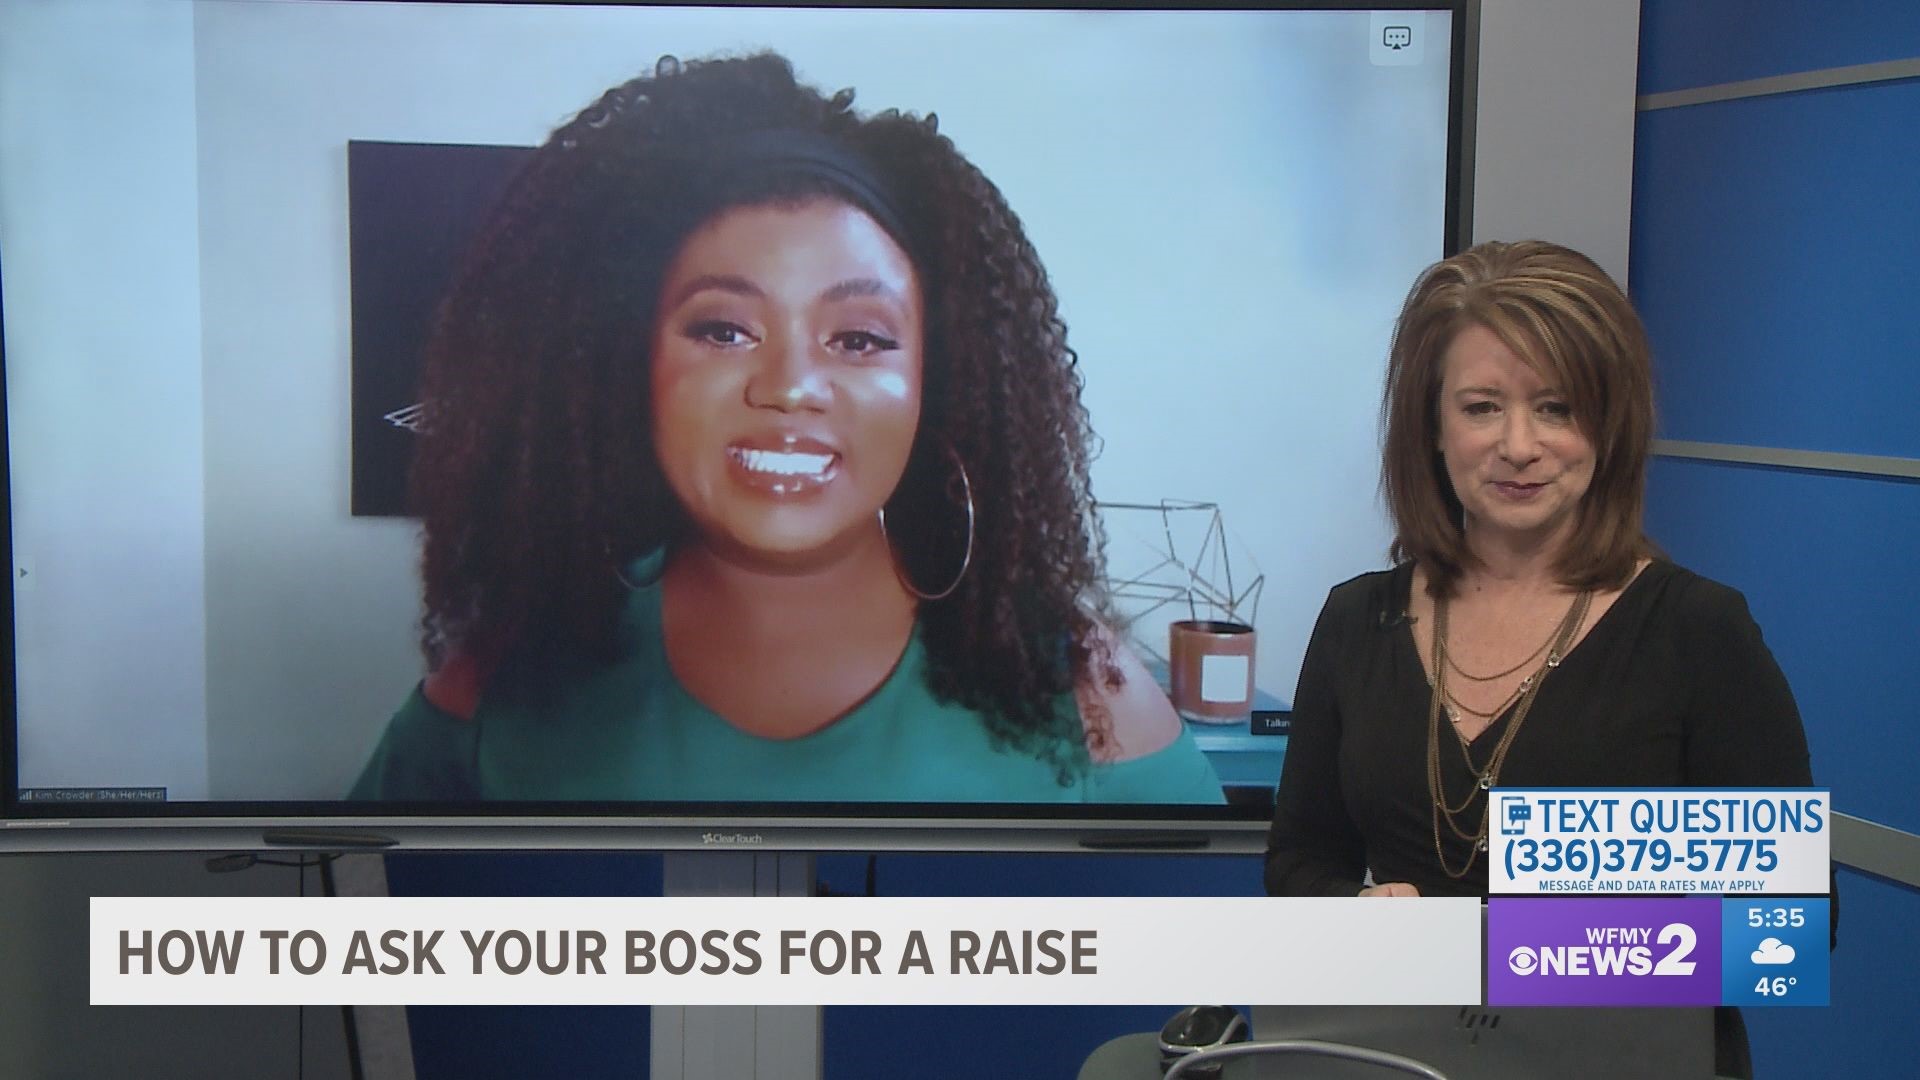 Kim Crowder from Kim Crowder Consulting shares her tips on how to ask for a raise.